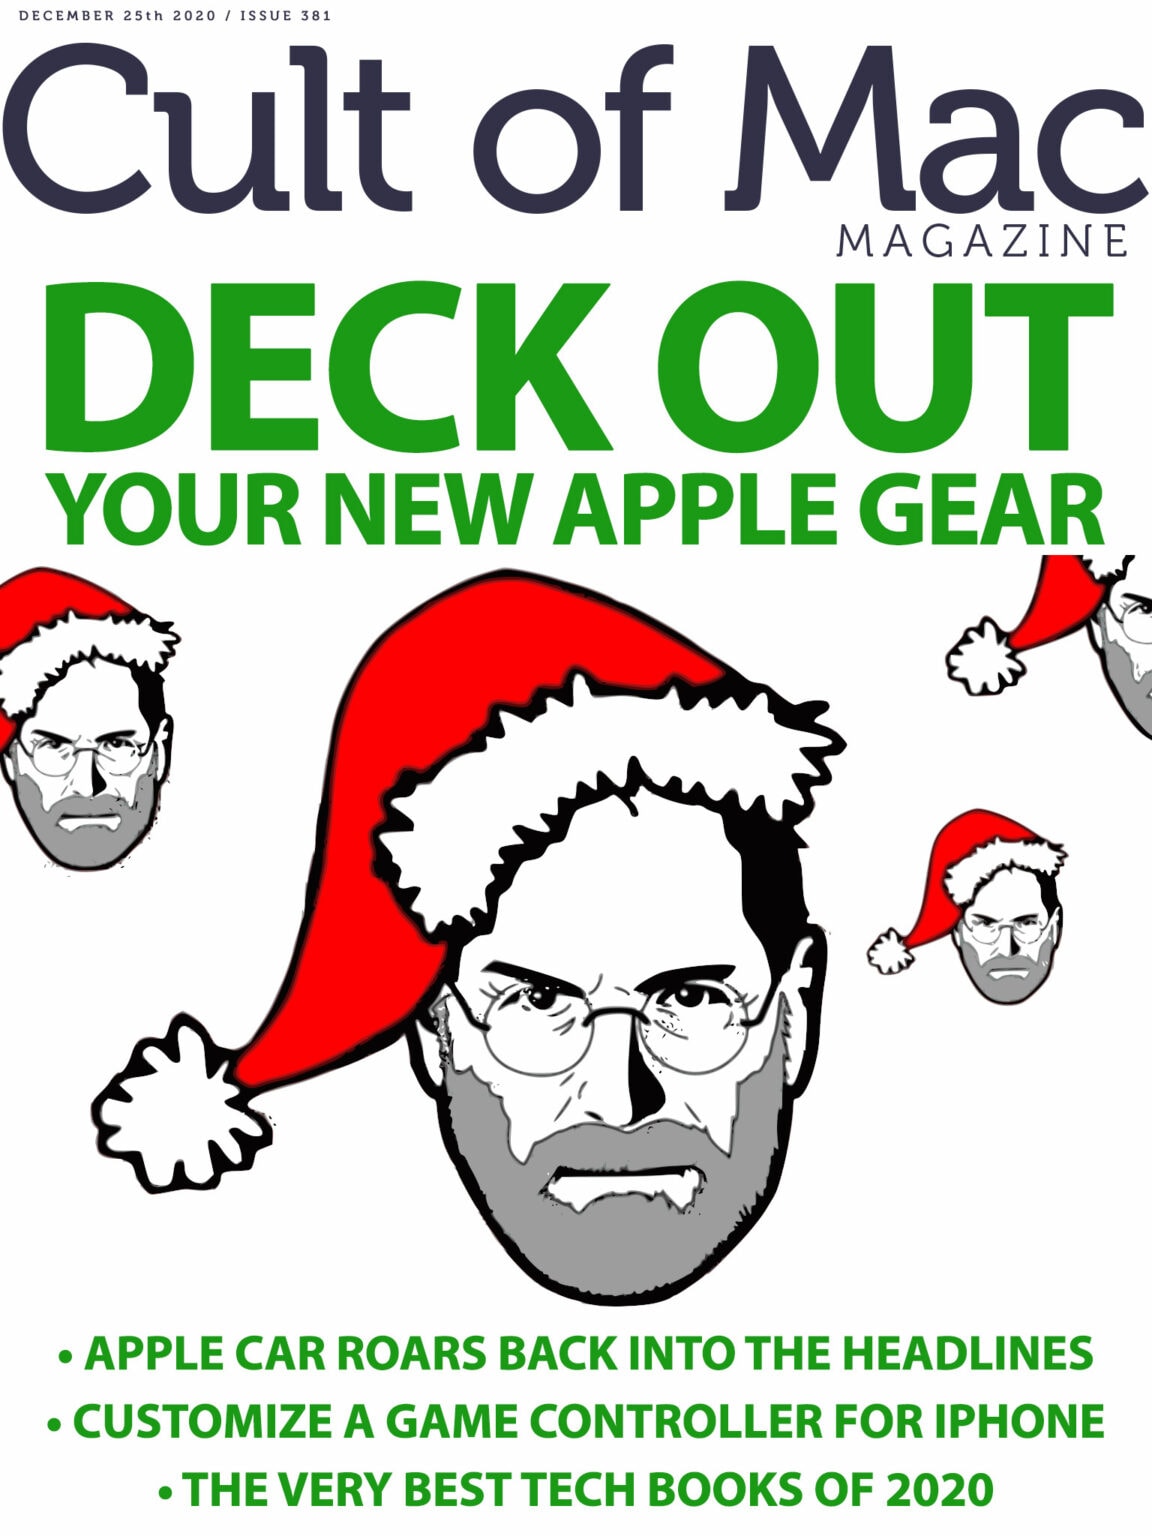 Deck out your new Apple gear.